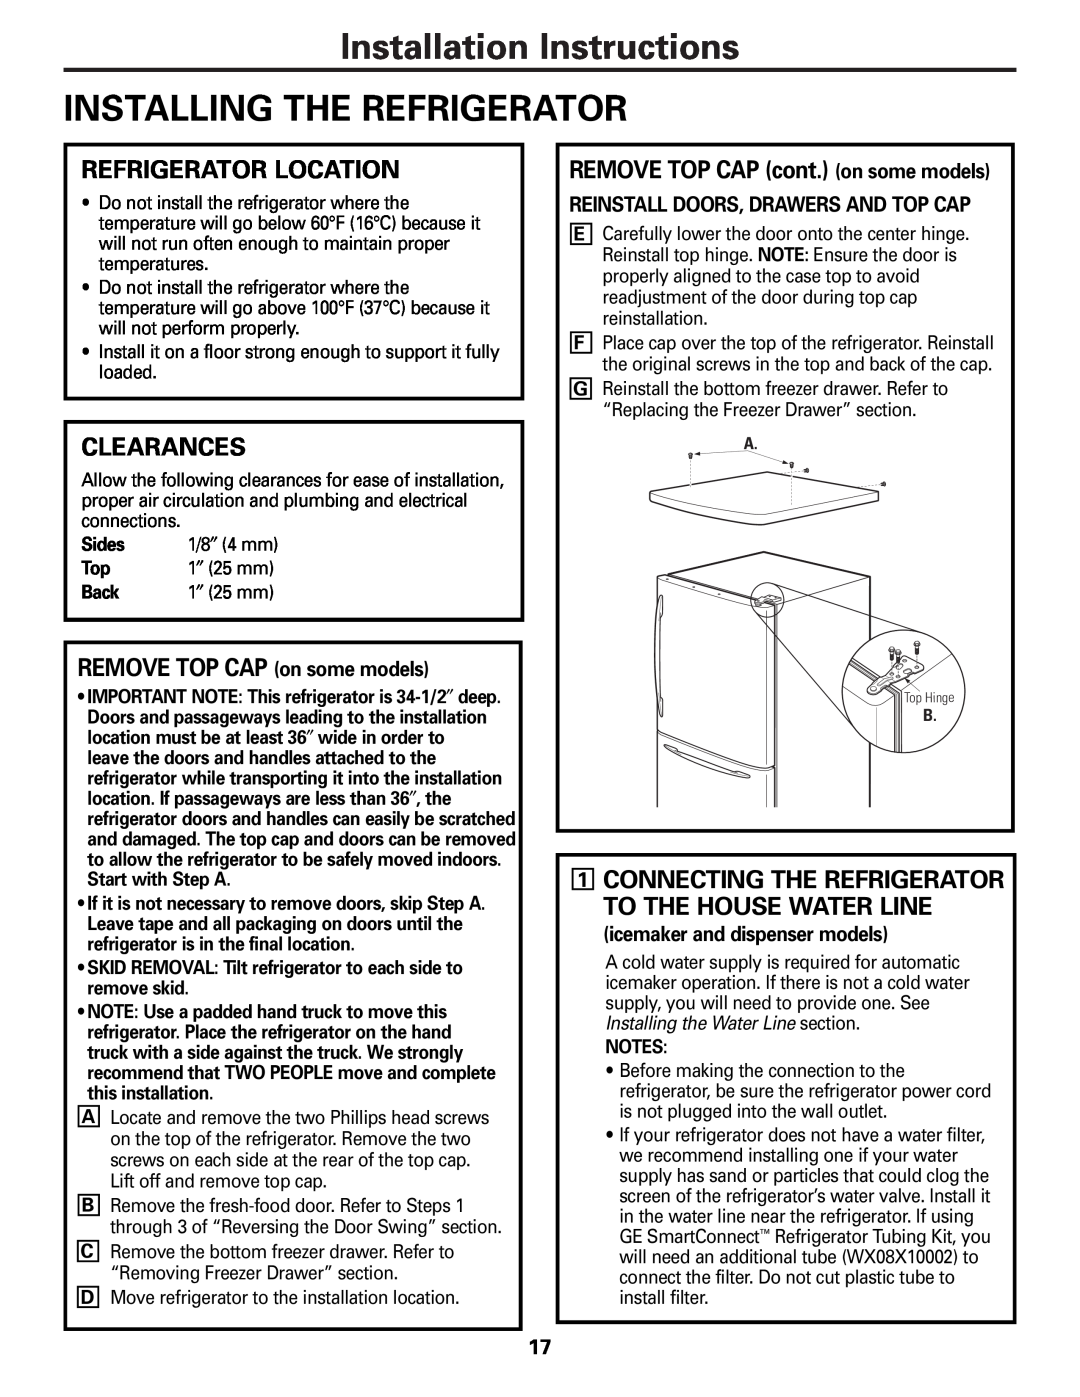 GE GDL22KCWSS manual Installation Instructions INSTALLING THE REFRIGERATOR, Refrigerator Location, Clearances, Sides, Back 